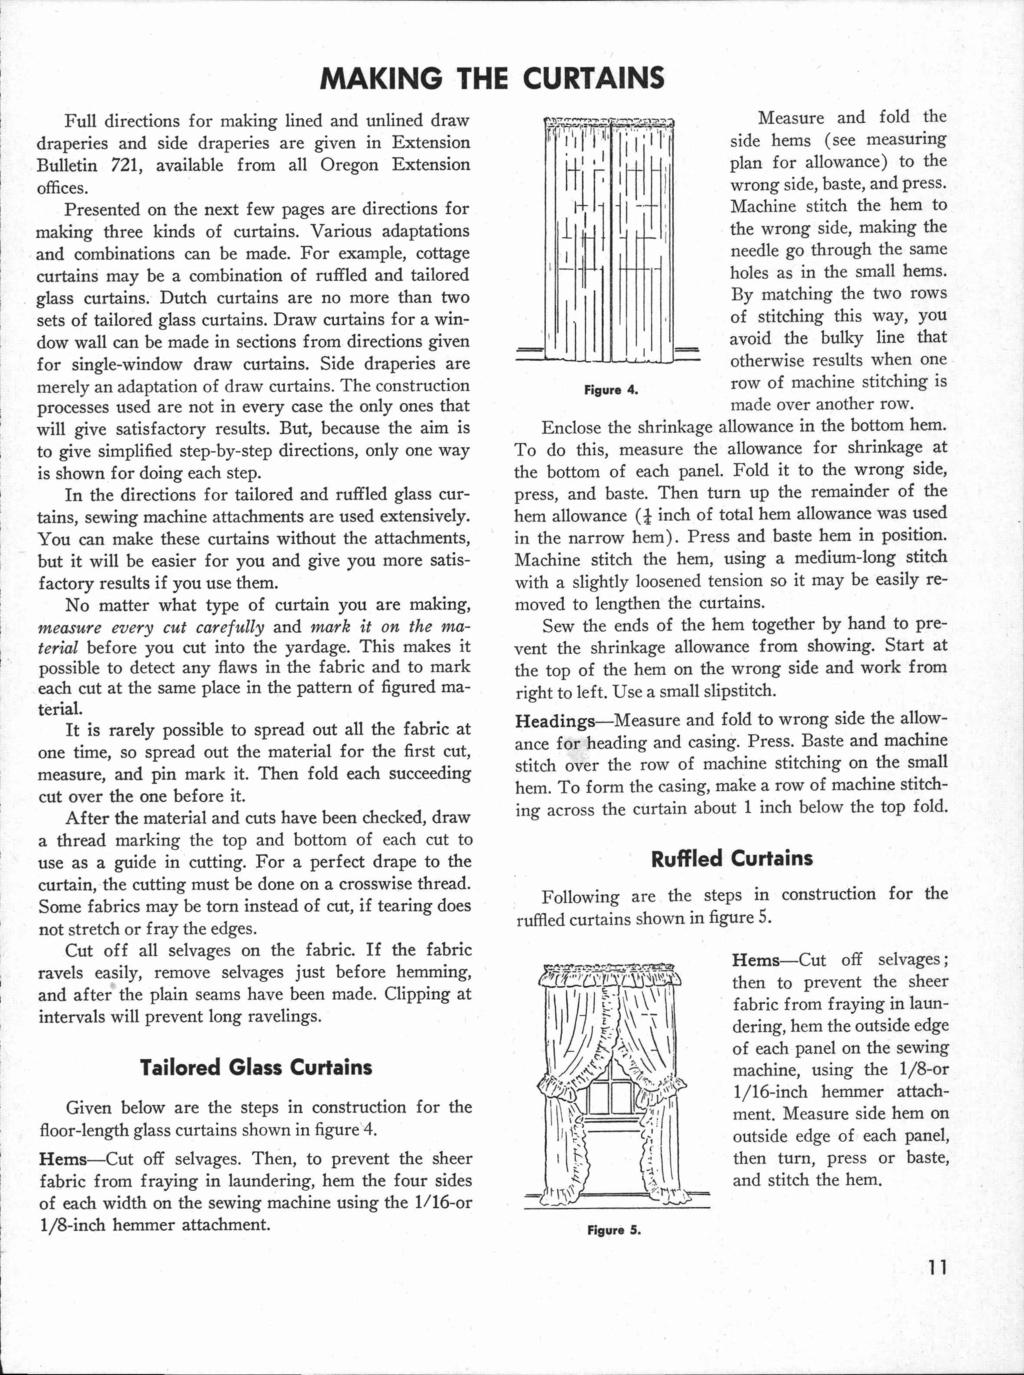 Full directions for making lined and unlined draw draperies and side draperies are given in Extension Bulletin 721, available from all Oregon Extension offices.